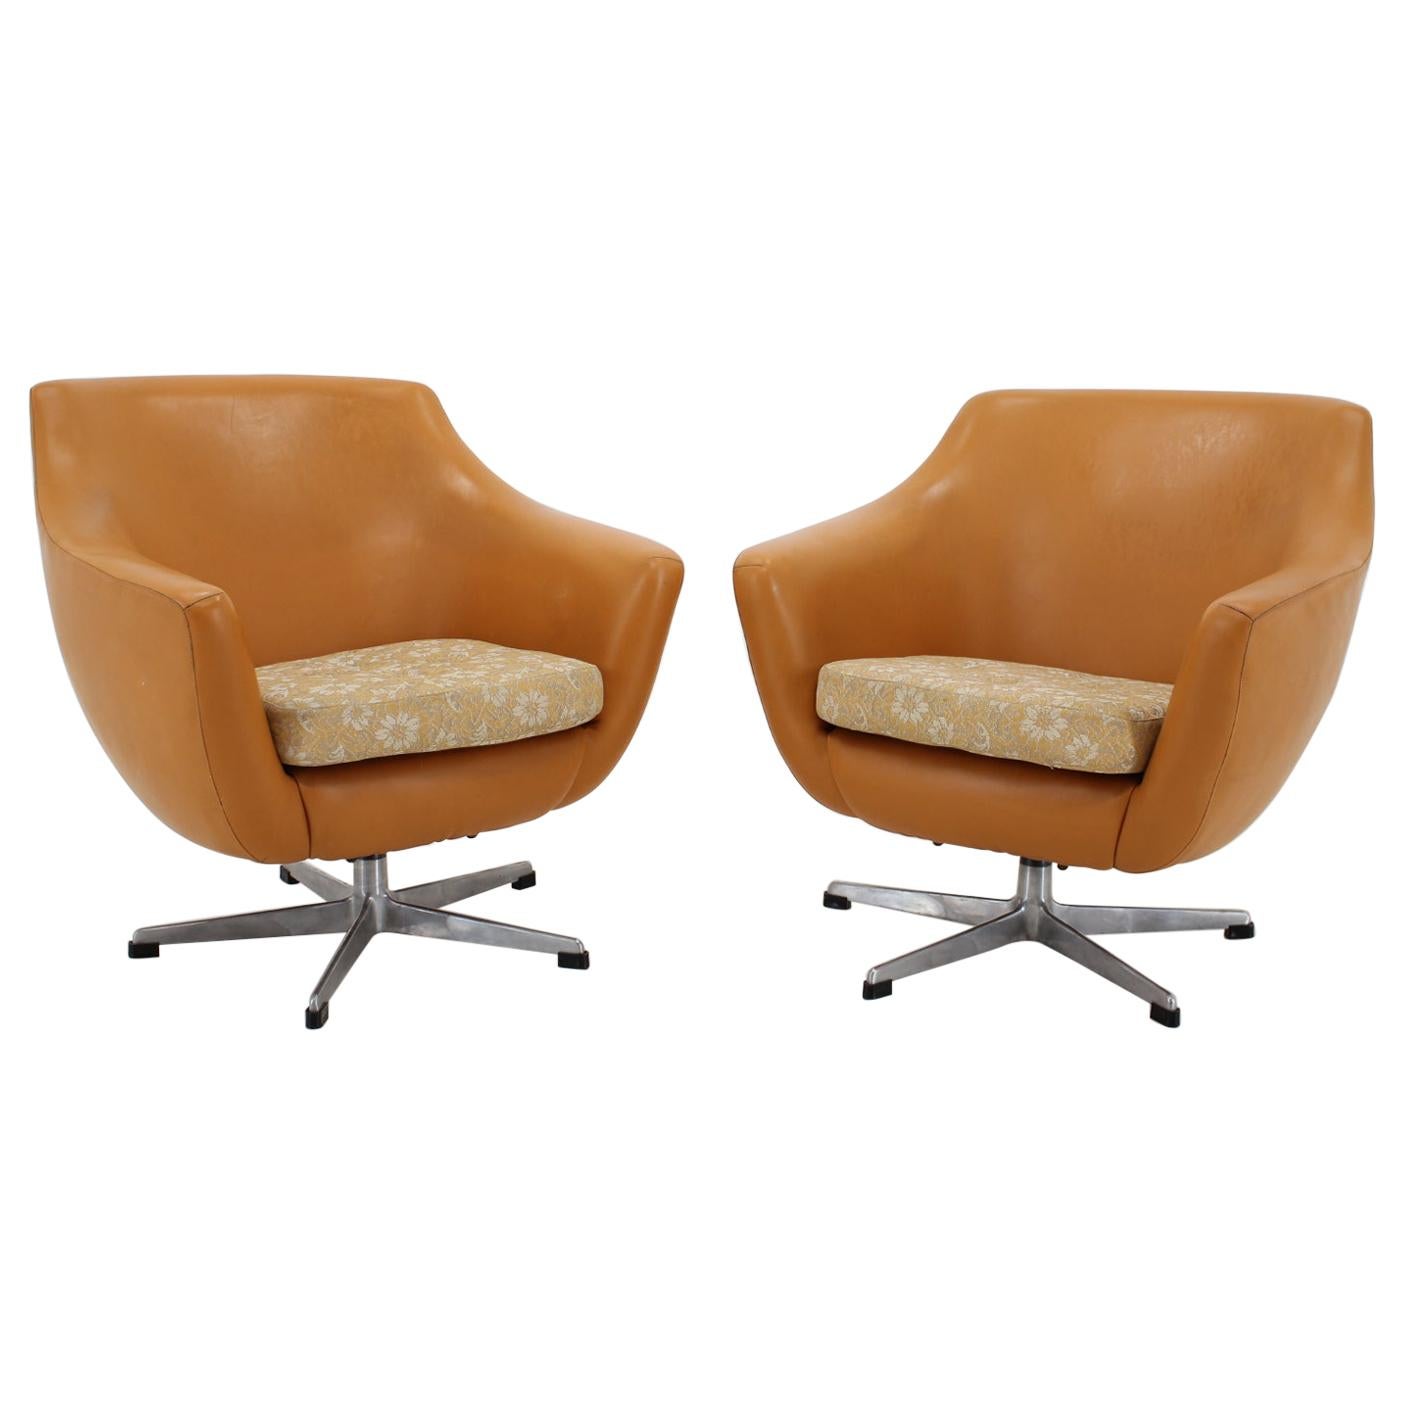 Pair of Leatherette Swivel Chairs, 1970s